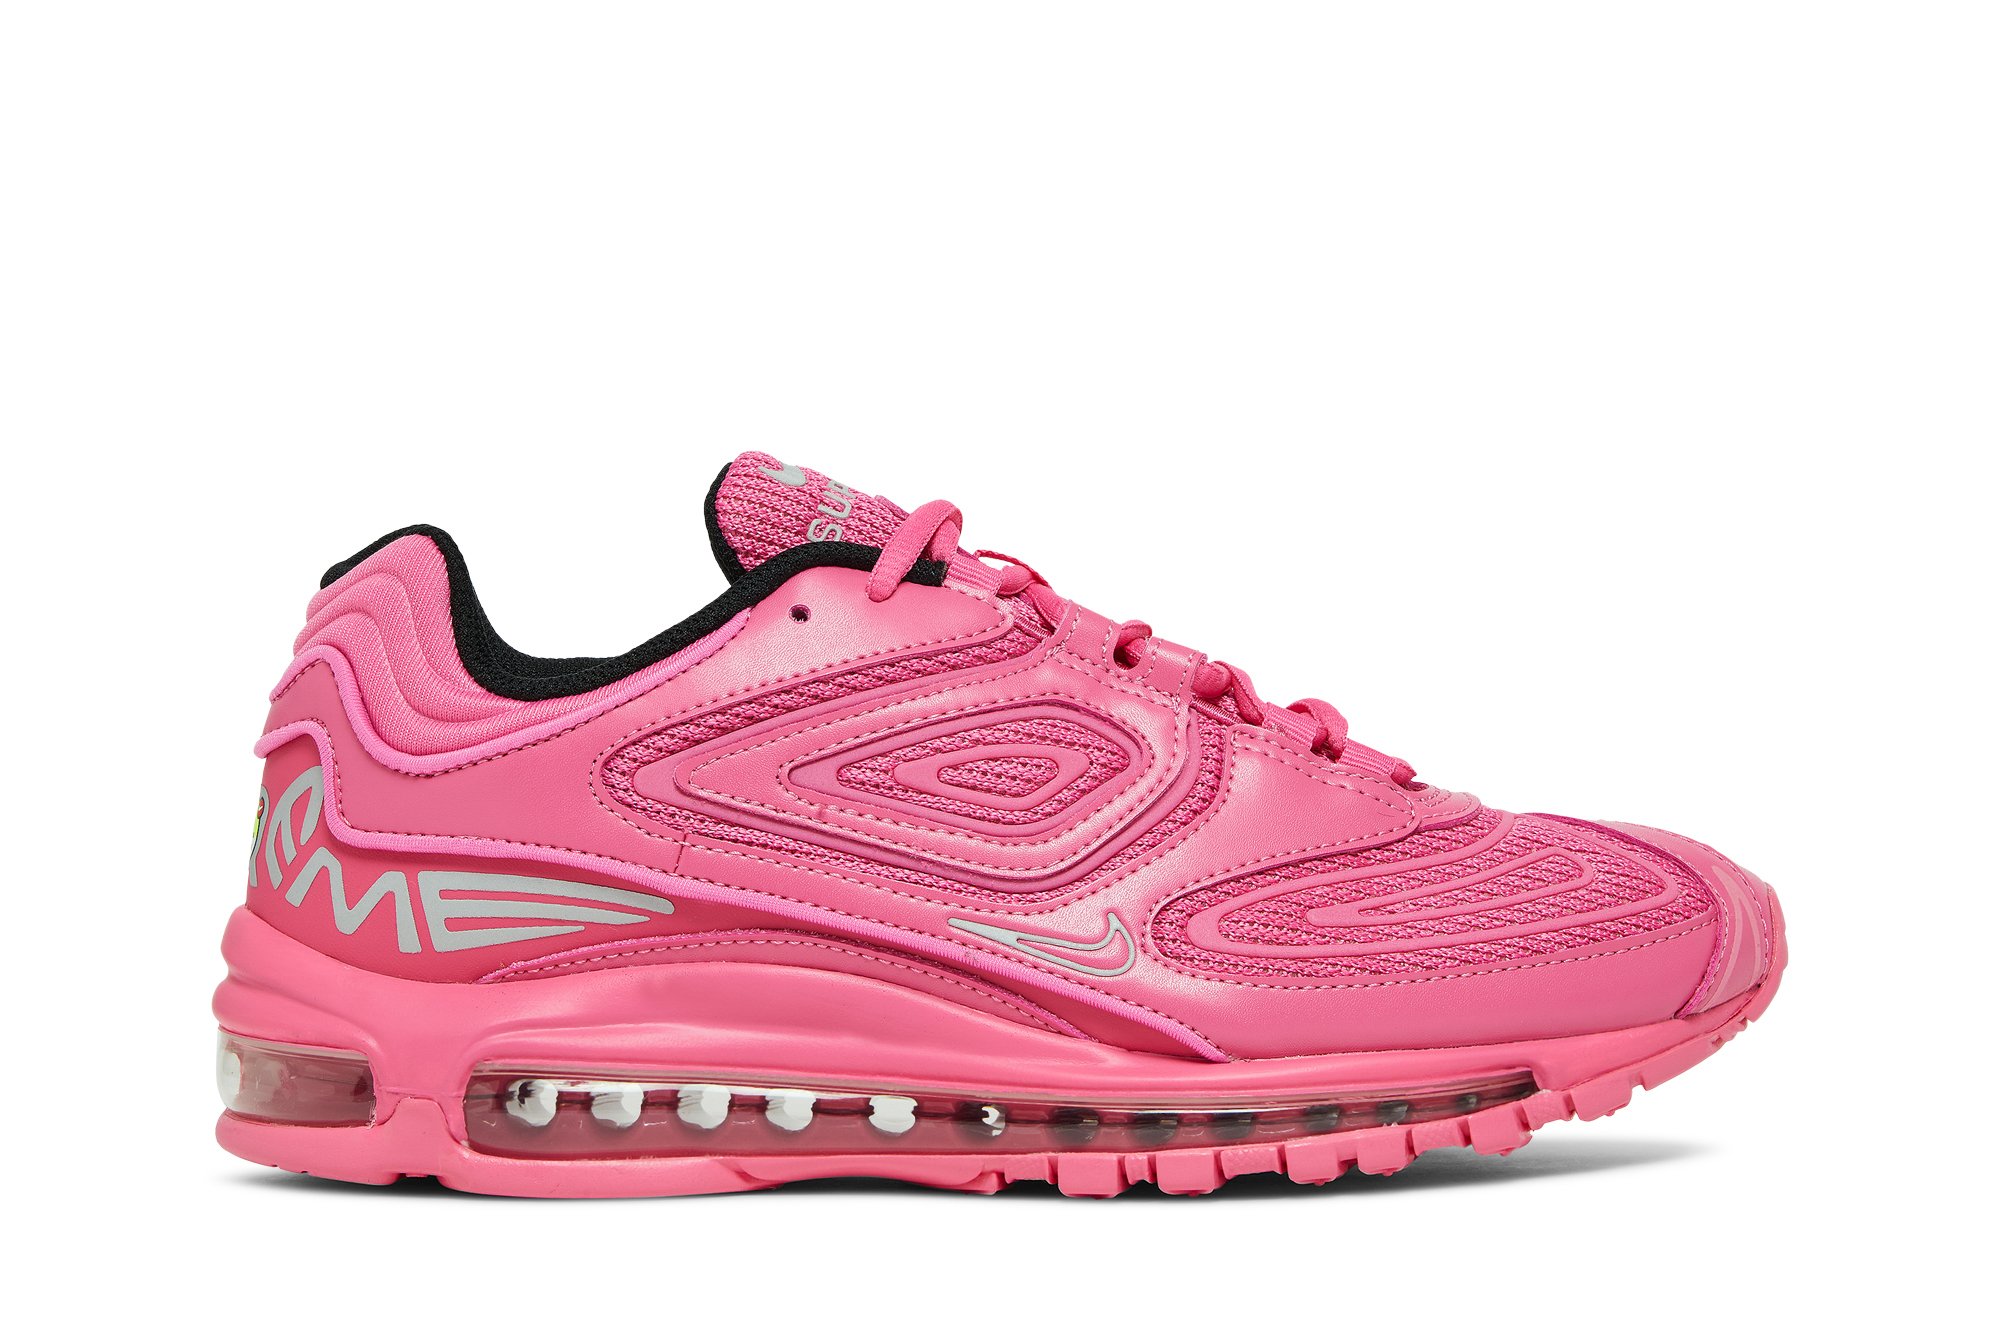 Buy Supreme x Air Max 98 TL SP 'Pinksicle' - DR1033 600 - Pink | GOAT